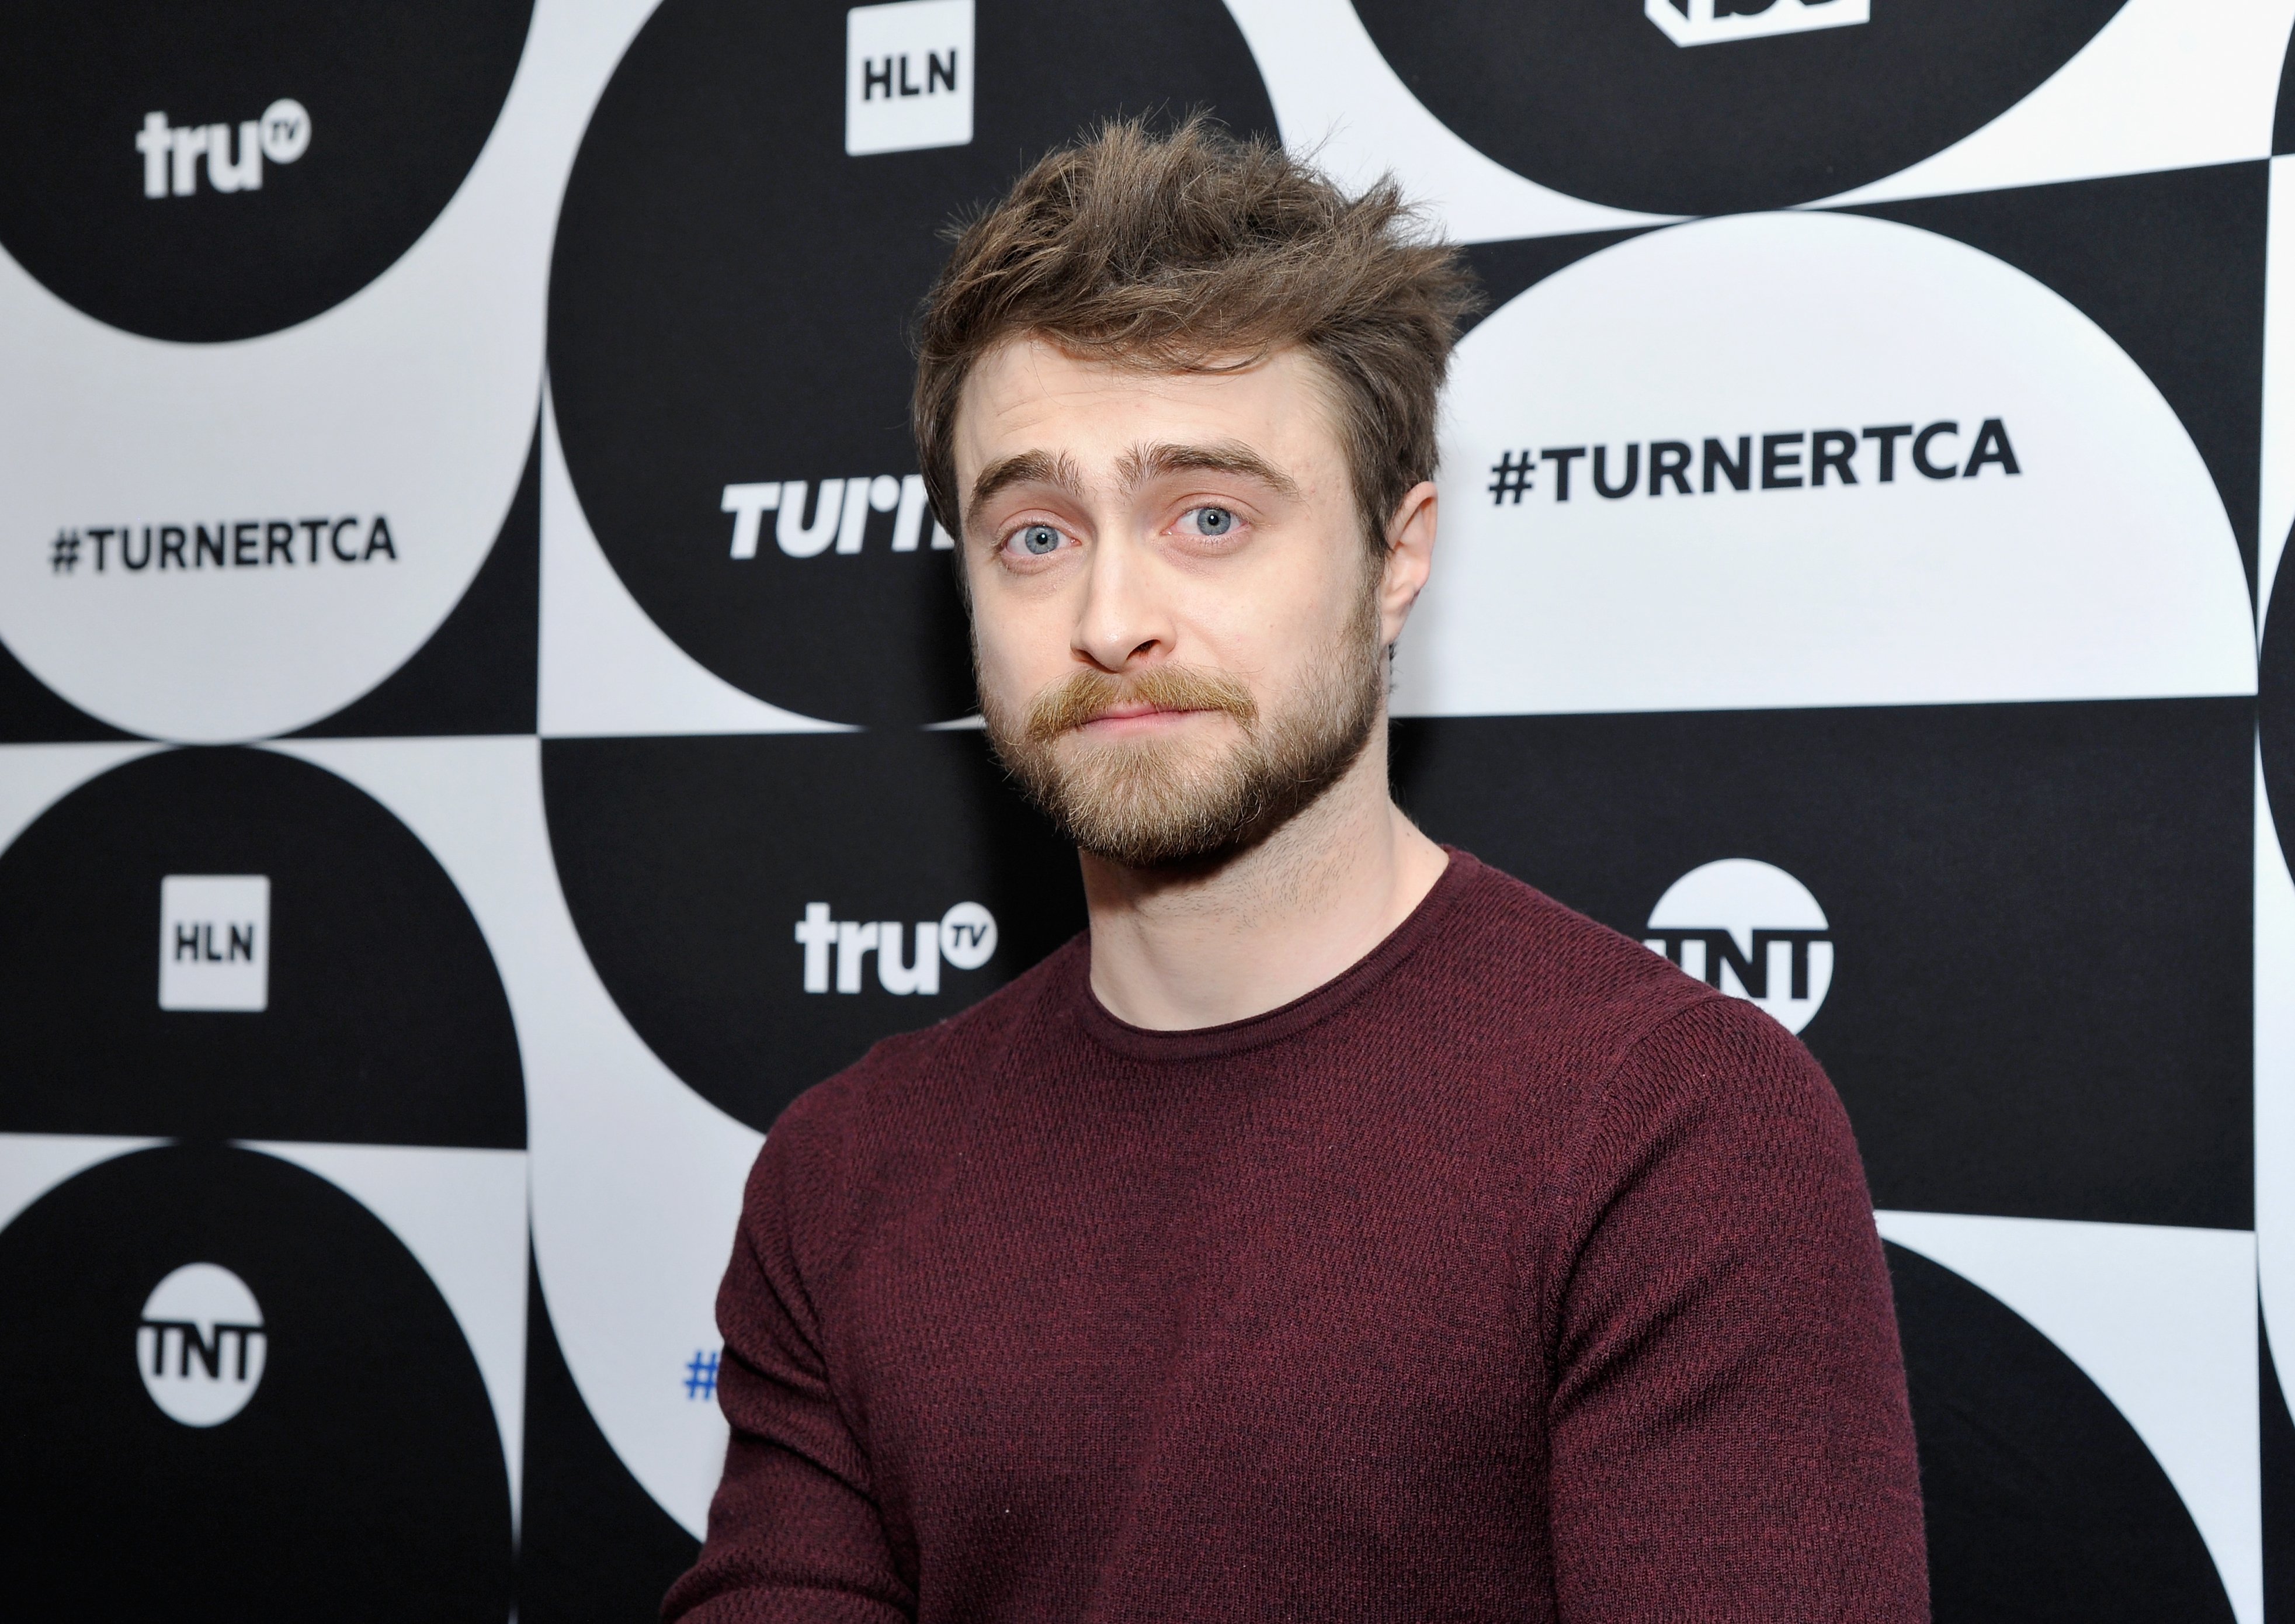 Daniel Radcliffe at TCA Turner Winter Press Tour 2019 on February 11, 2019, in Pasadena, California. | Source: Getty Images